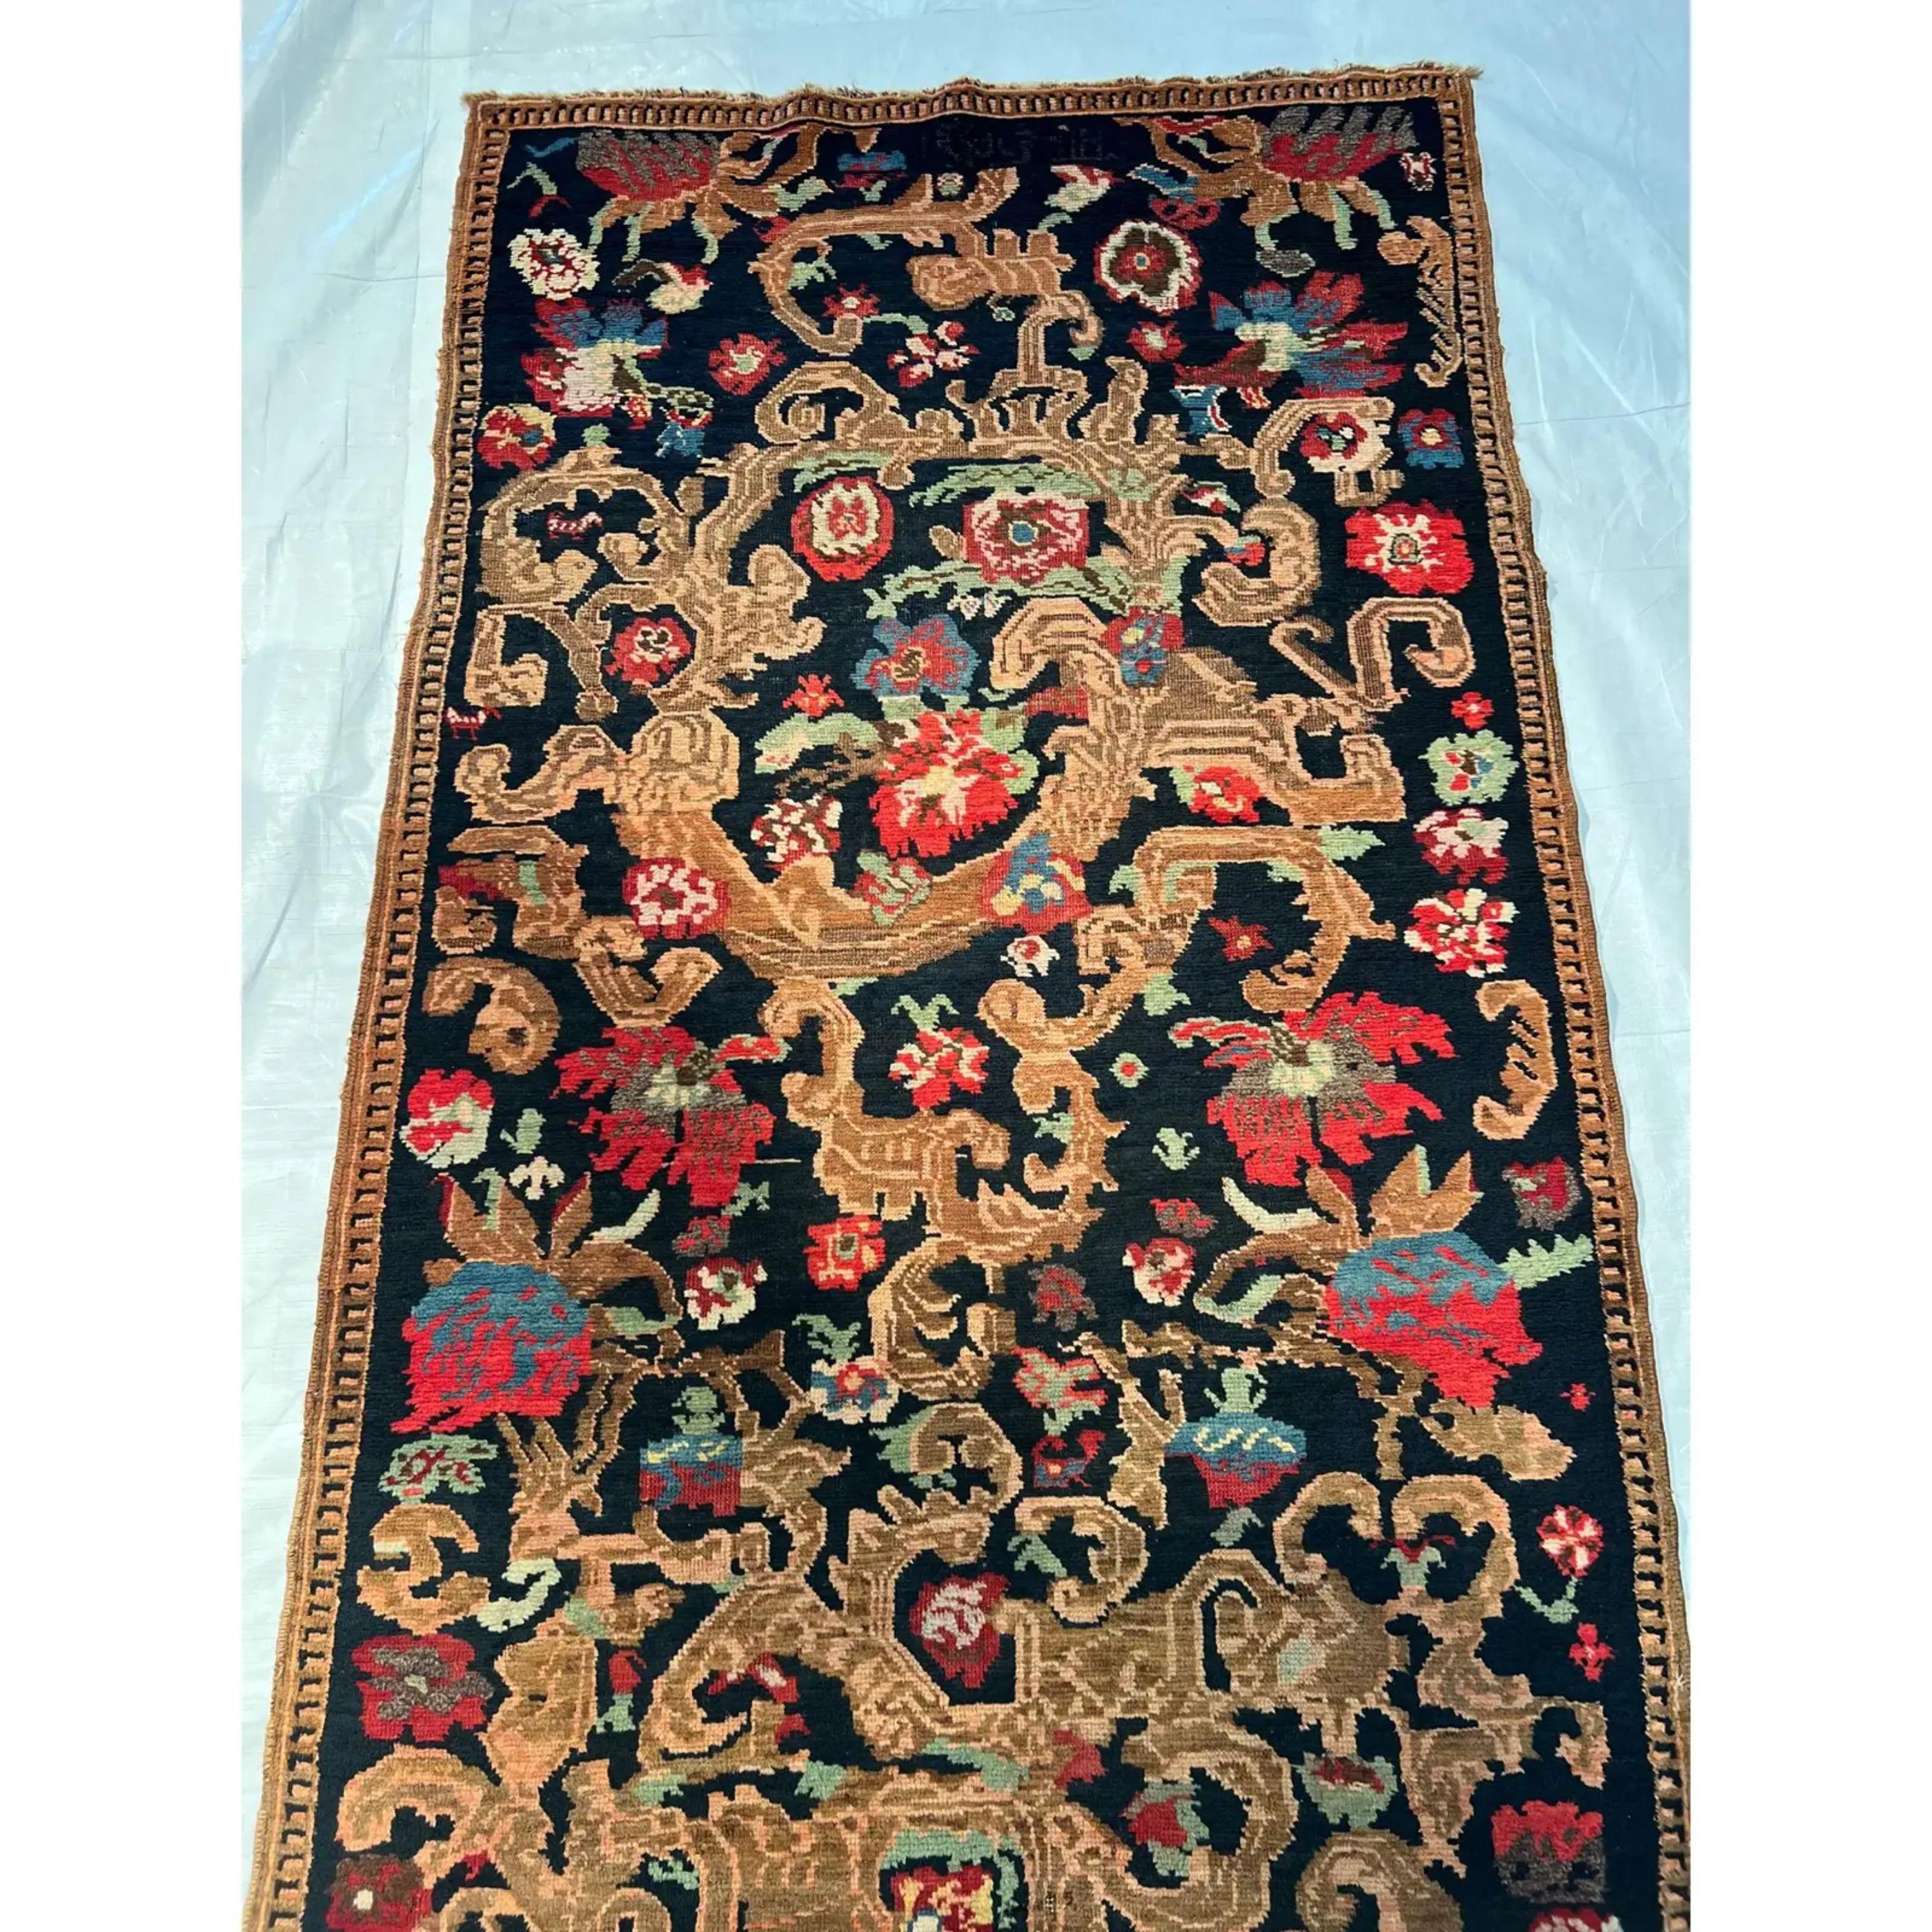 1900s Antique Gharabagh Rug, handmade and hand-knotted